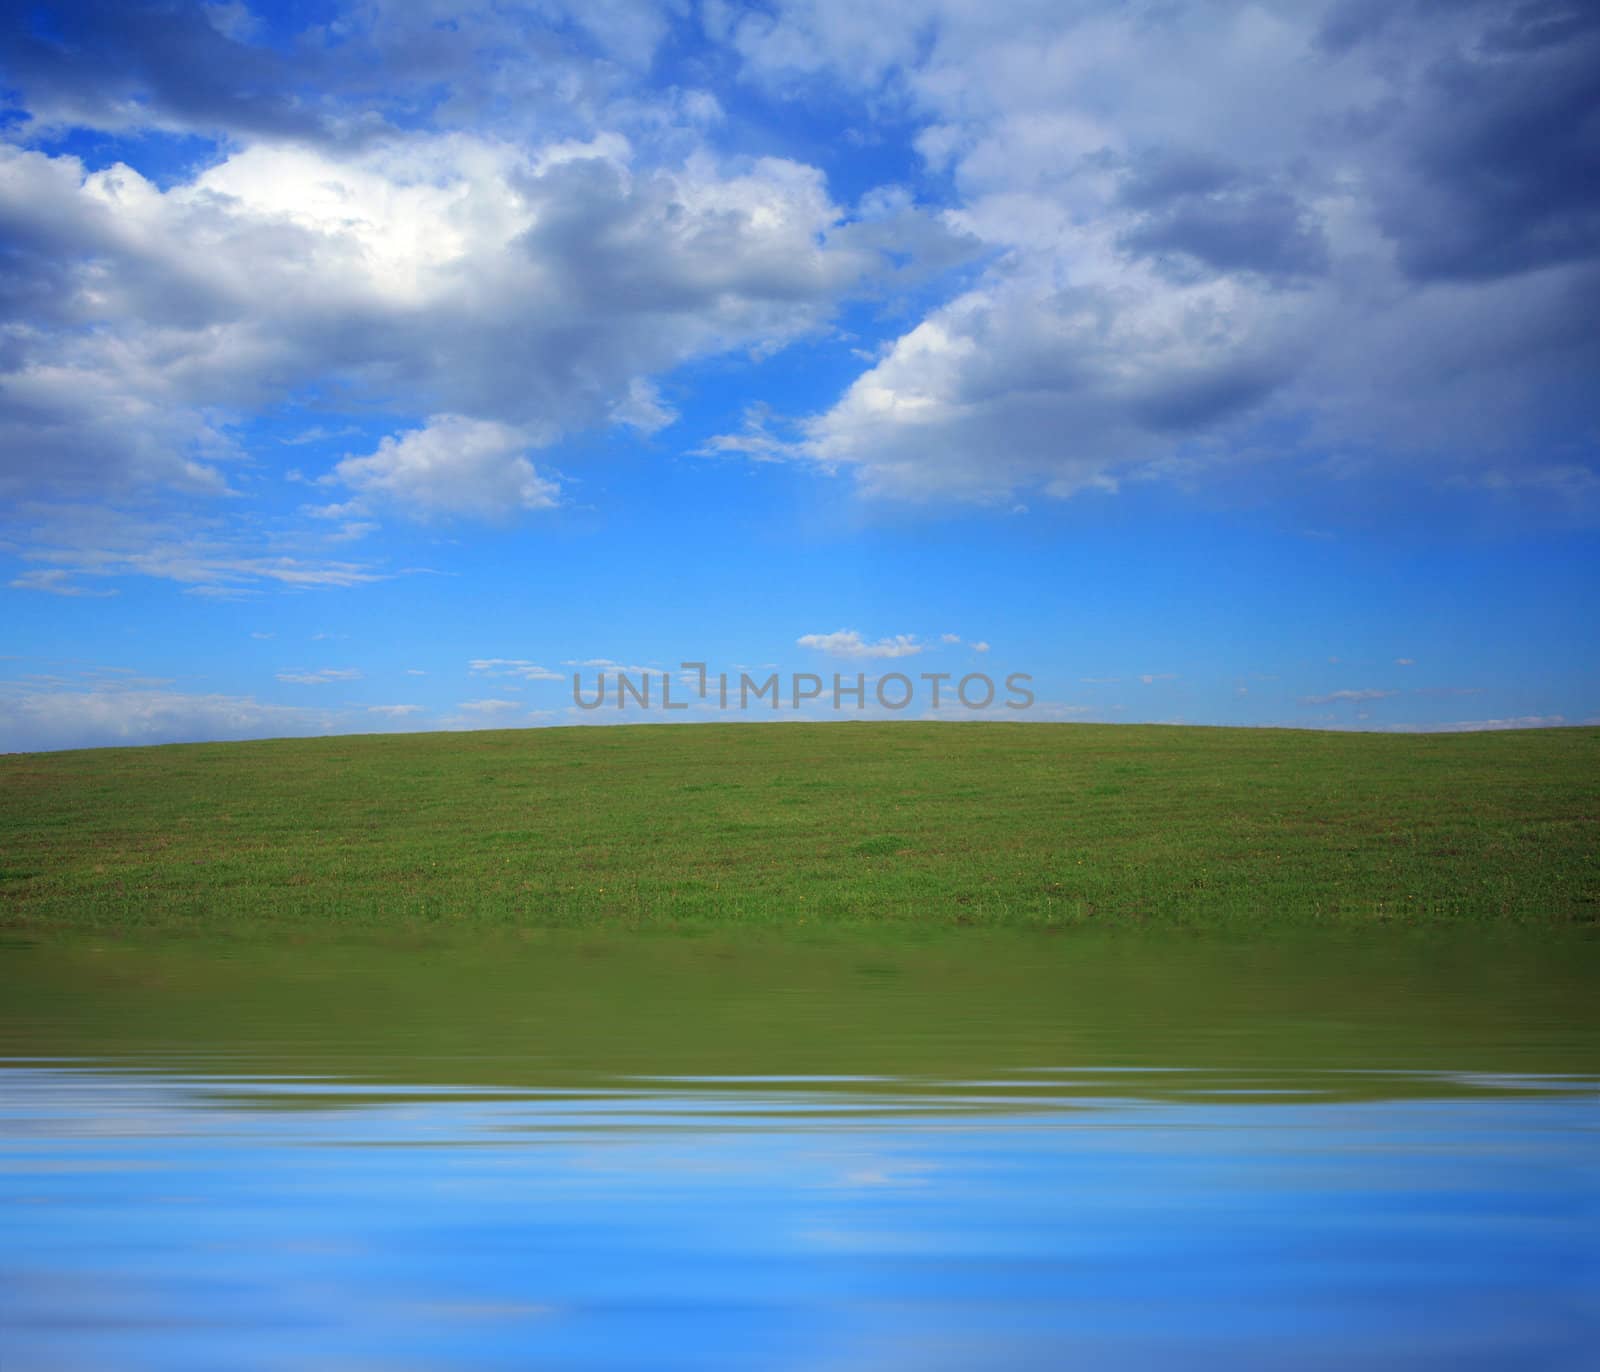 An image of field and blue sky with clouds